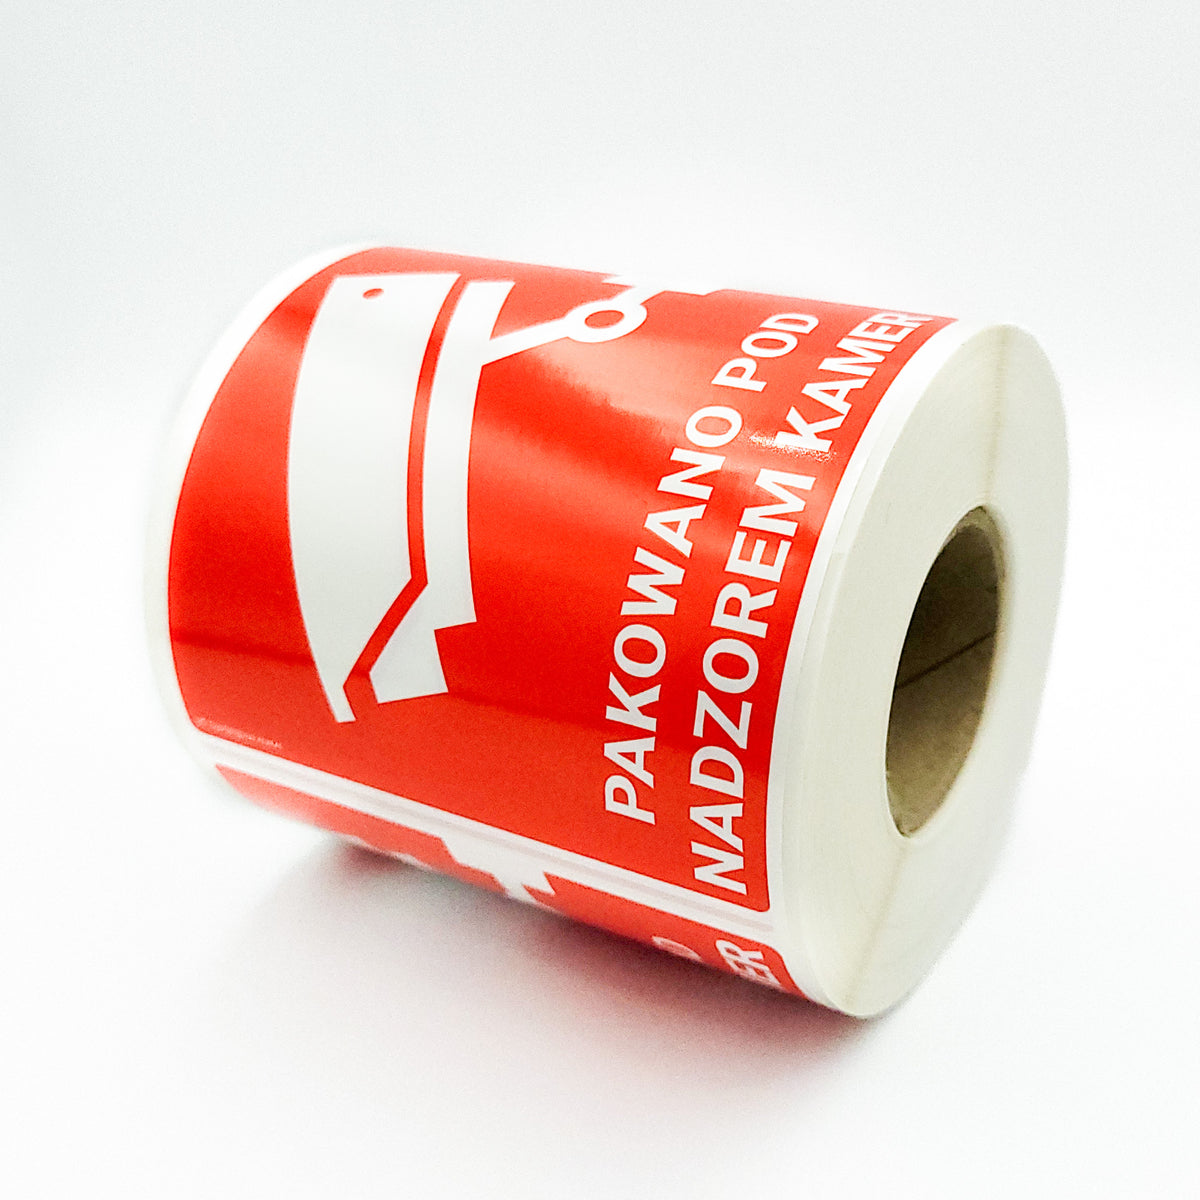 Self-adhesive warning labels - PP FILM- Packaged under camera surveillance! - 98x98mm 500 per roll